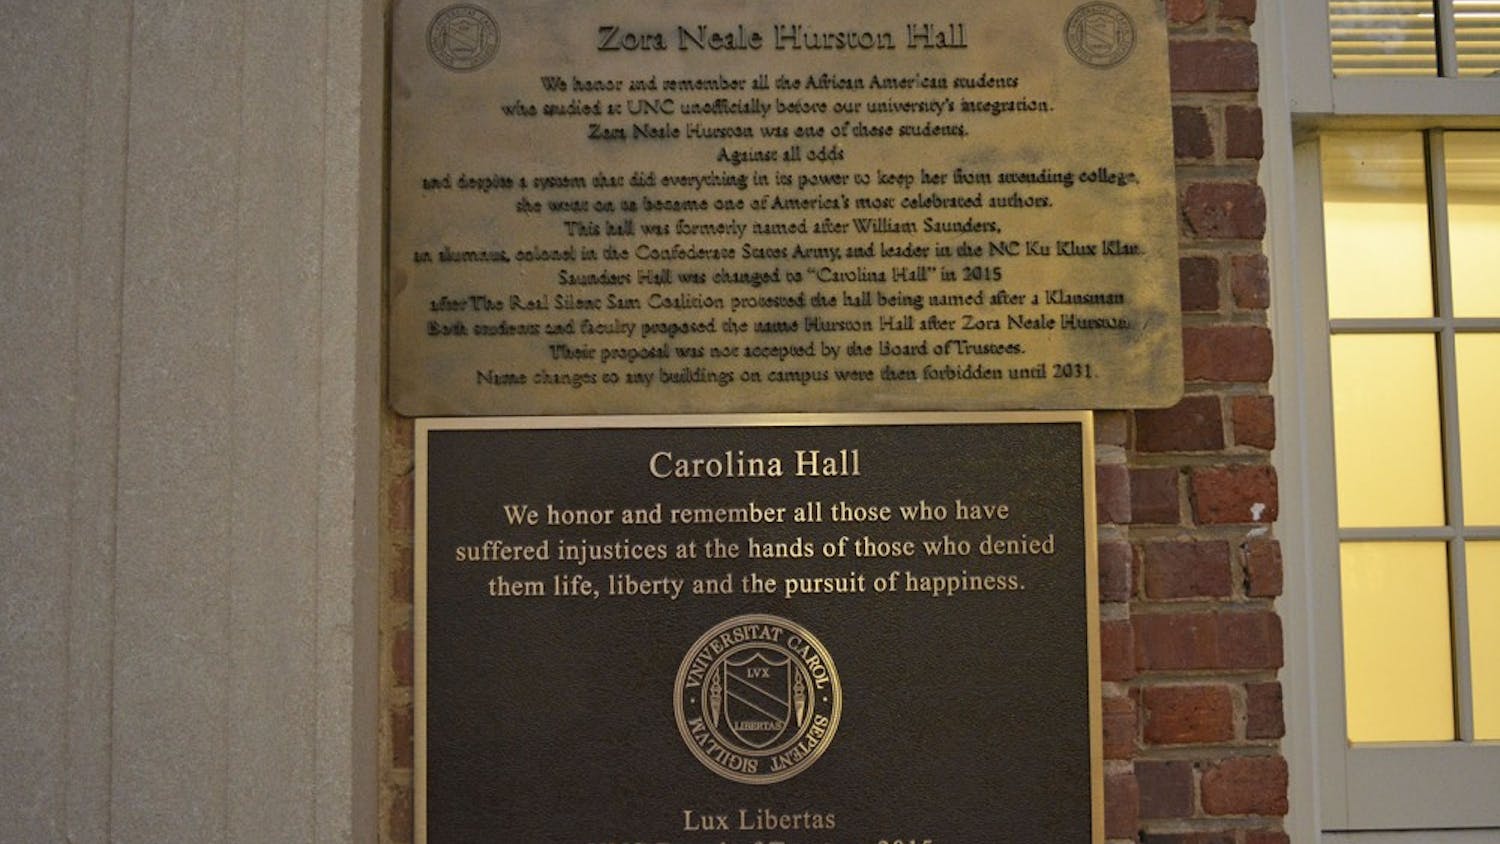 A plaque was placed on the outside of Carolina Hall, renaming it Zora Neale Hurston Hall. The plaque will be removed according to UNC Facilities Services.&nbsp;&nbsp;